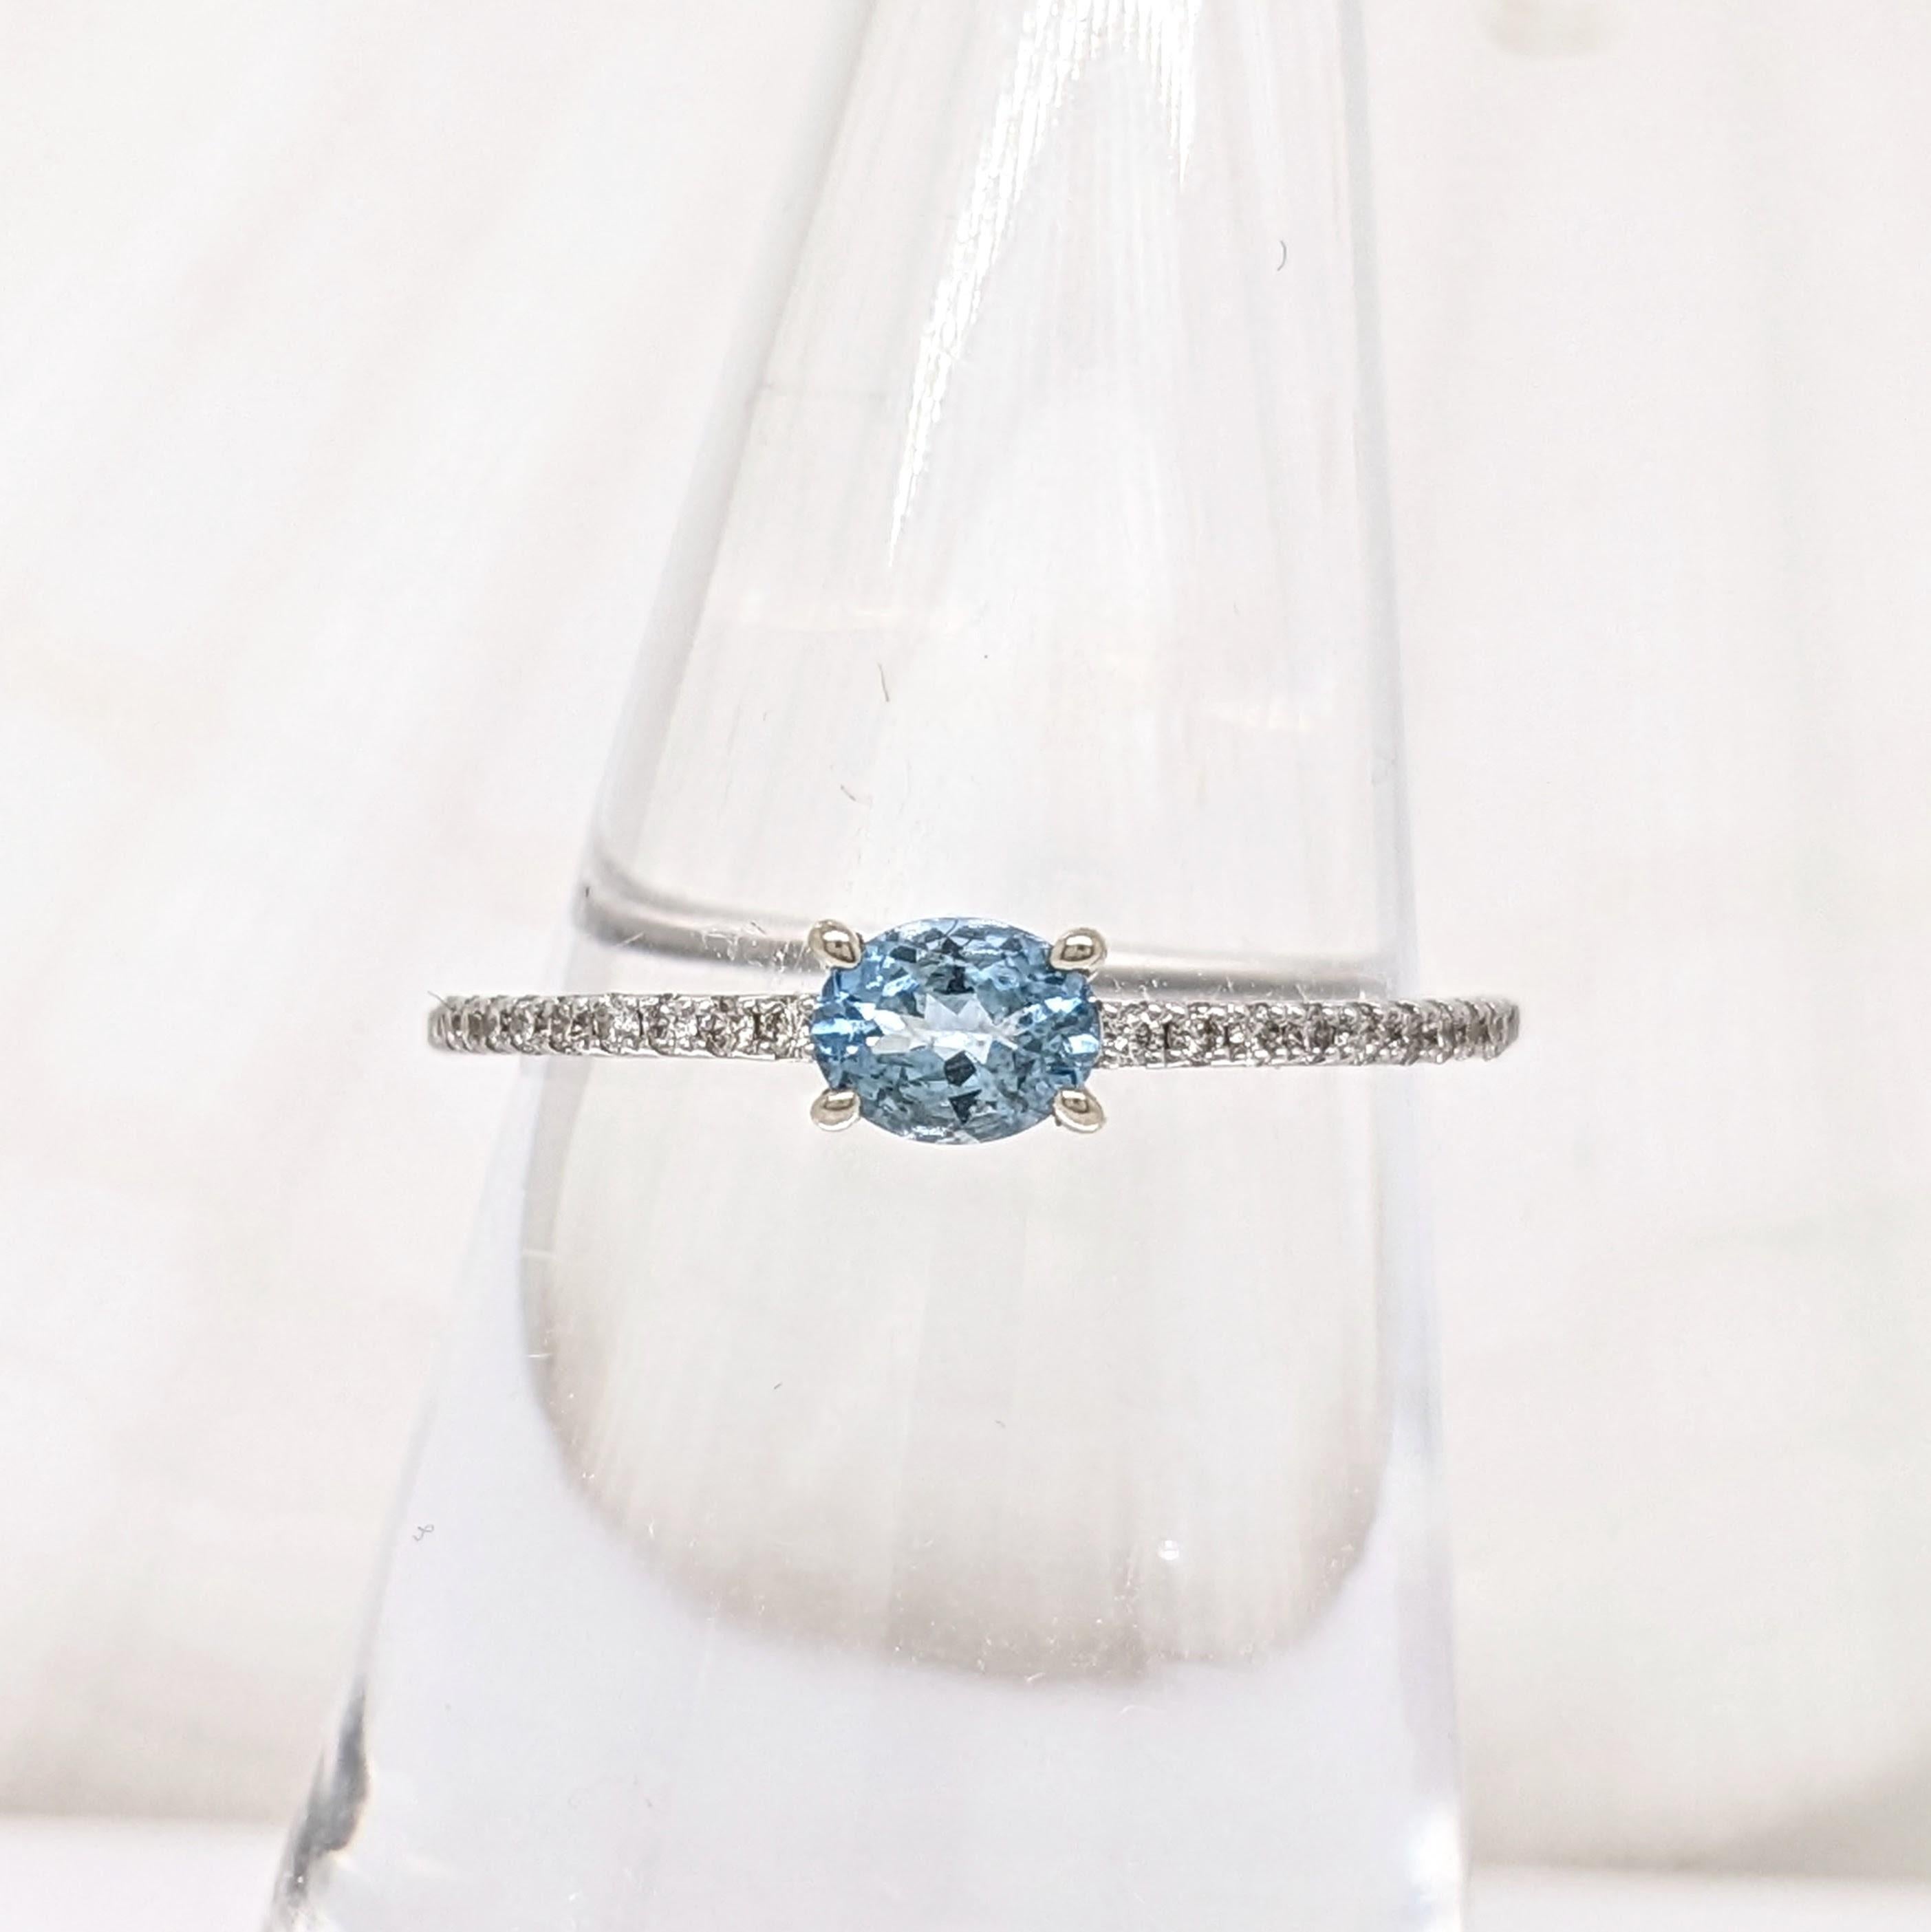 This beautiful ring features an oval east west aquamarine gemstone in 14k yellow gold with natural earth-mined diamonds. A dainty ring design perfect for an eye catching engagement or anniversary. Aquamarine does not only make a beautiful March